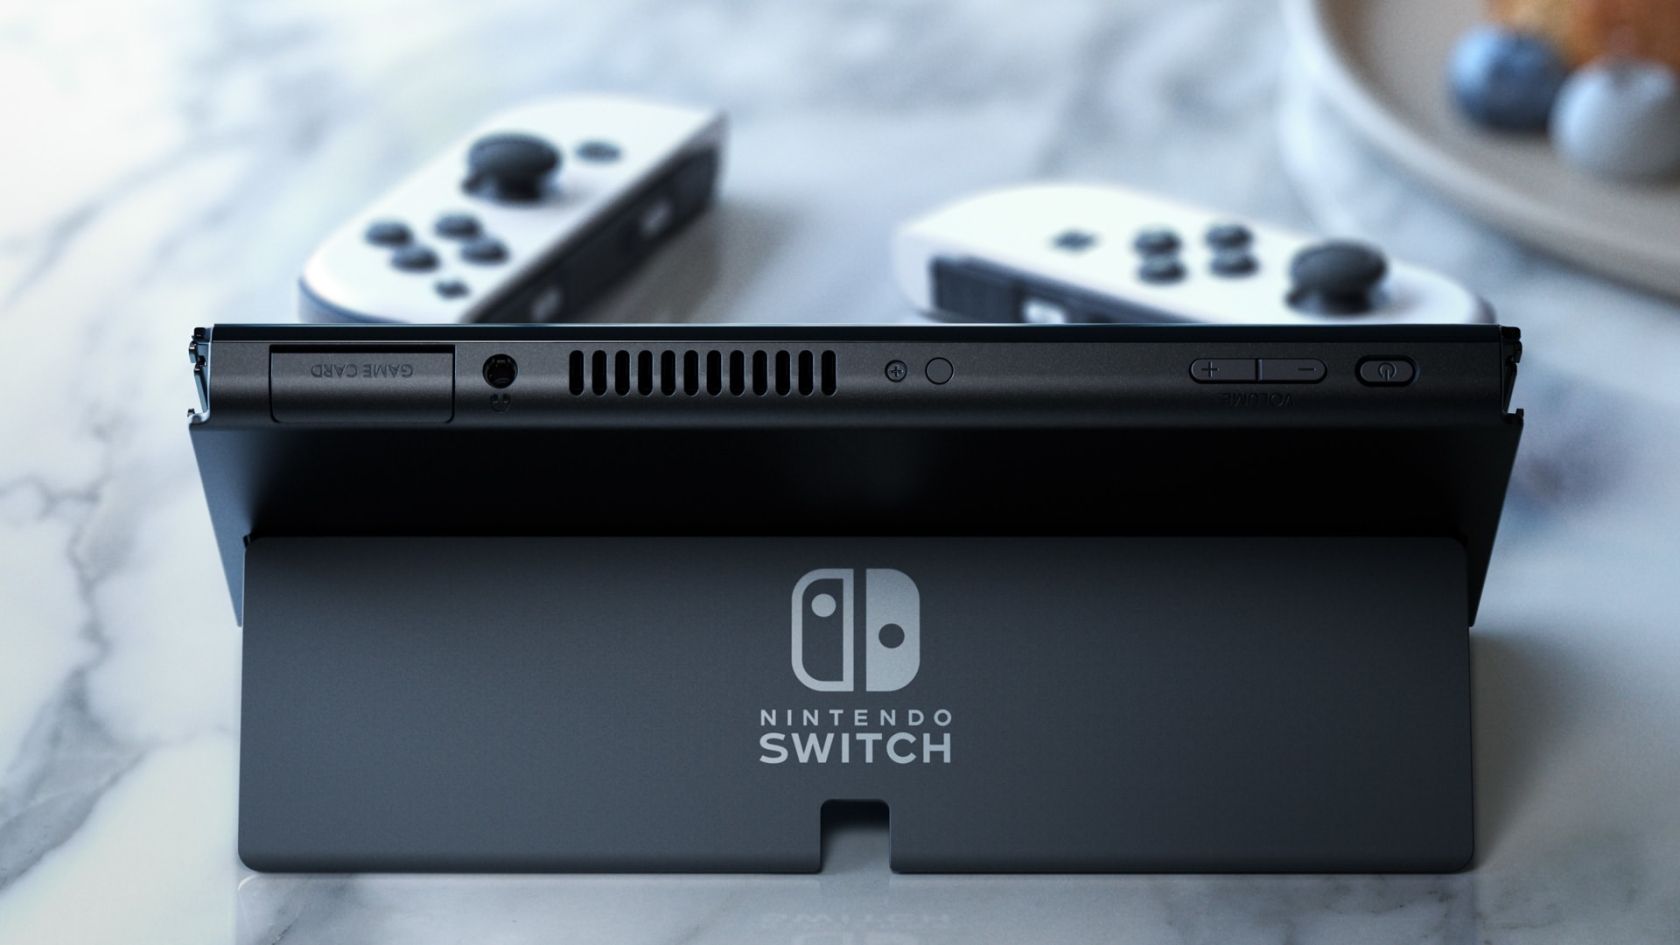 Nintendo Switch OLED model stand